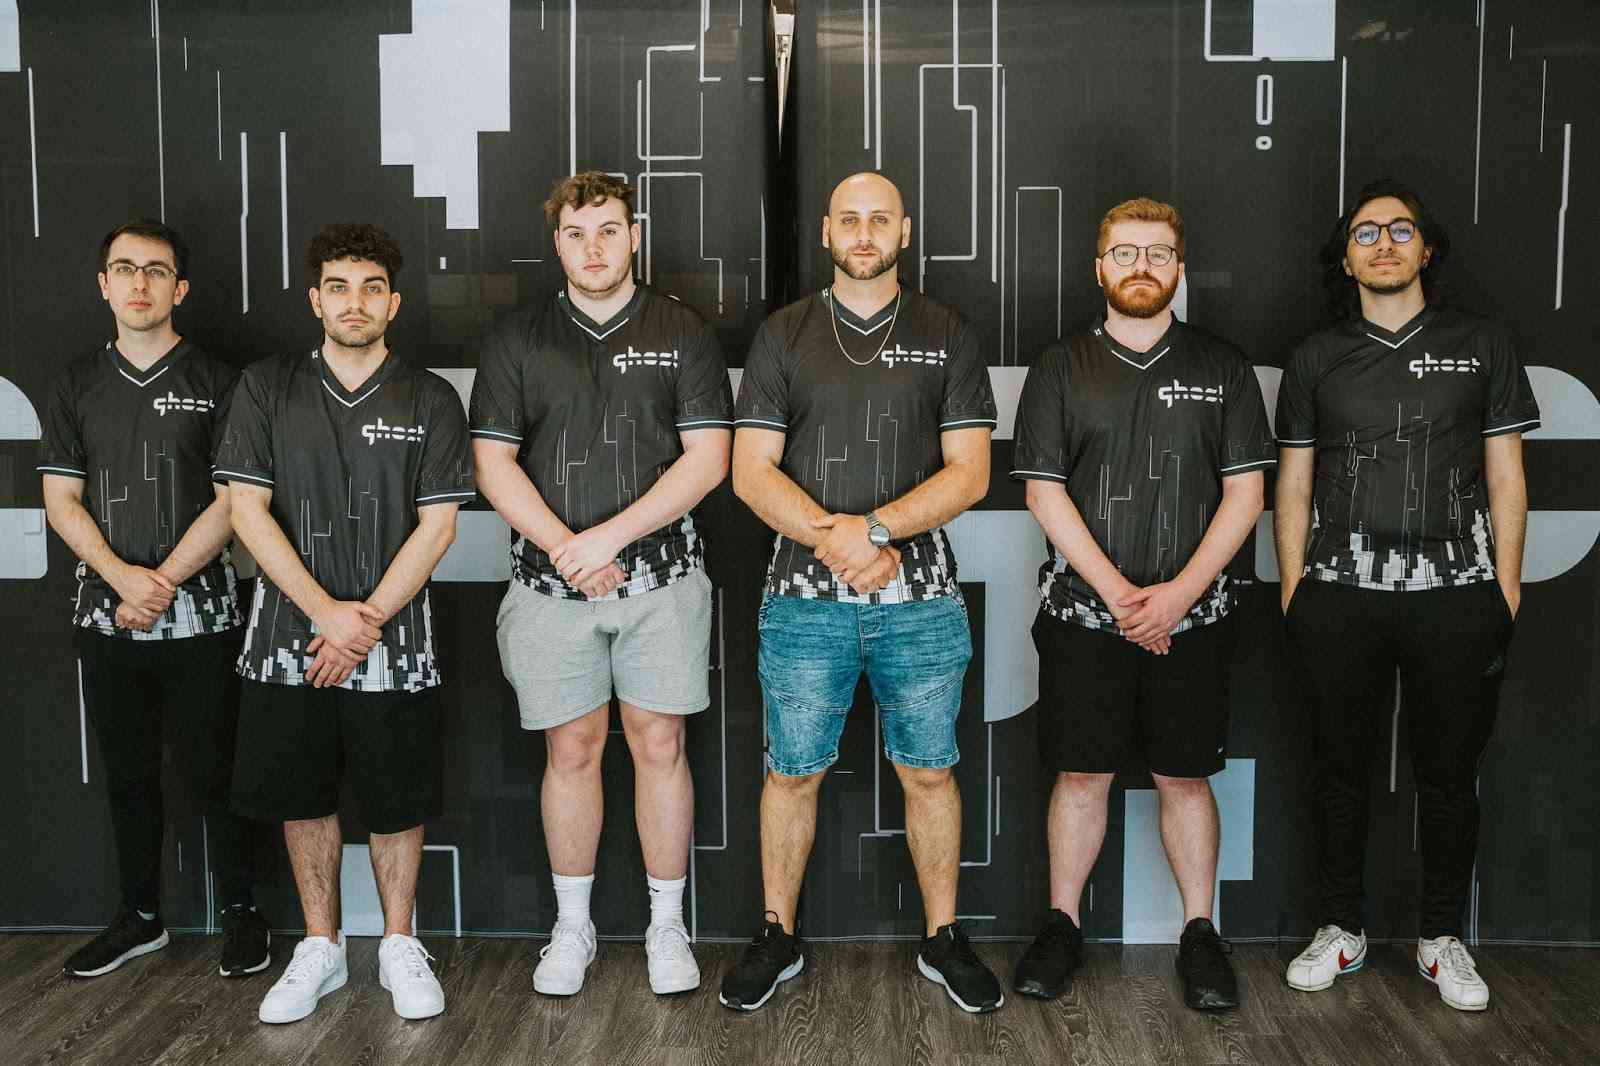 The roster for Ghost Gaming appear in team jerseys